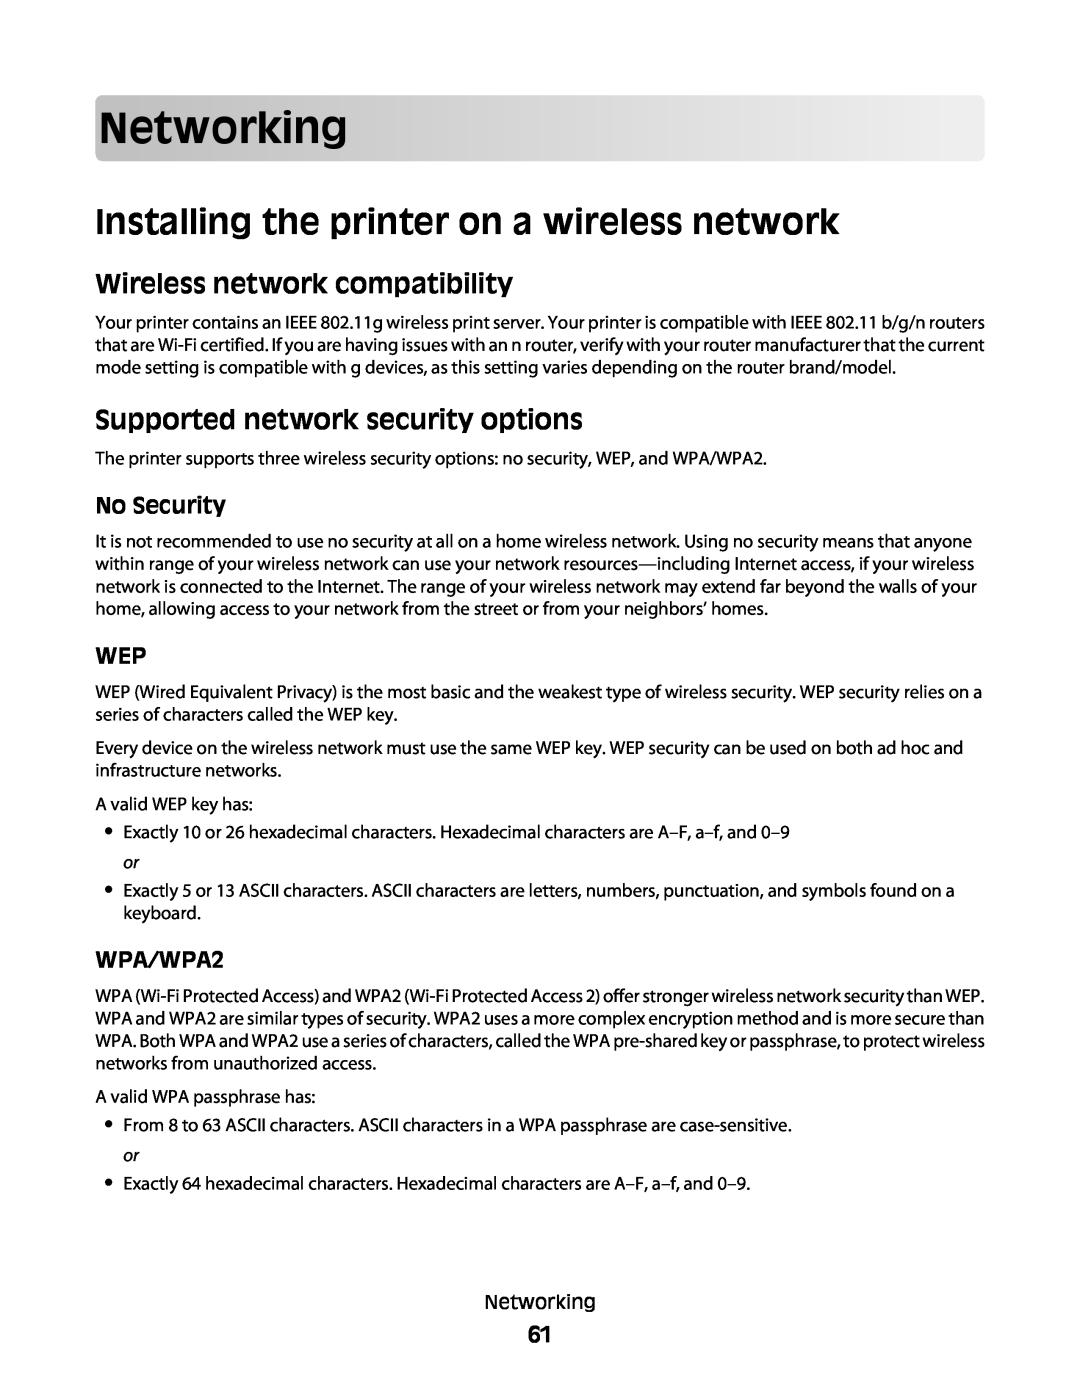 Lexmark 10E, 101 Networking, Installing the printer on a wireless network, Wireless network compatibility, No Security 